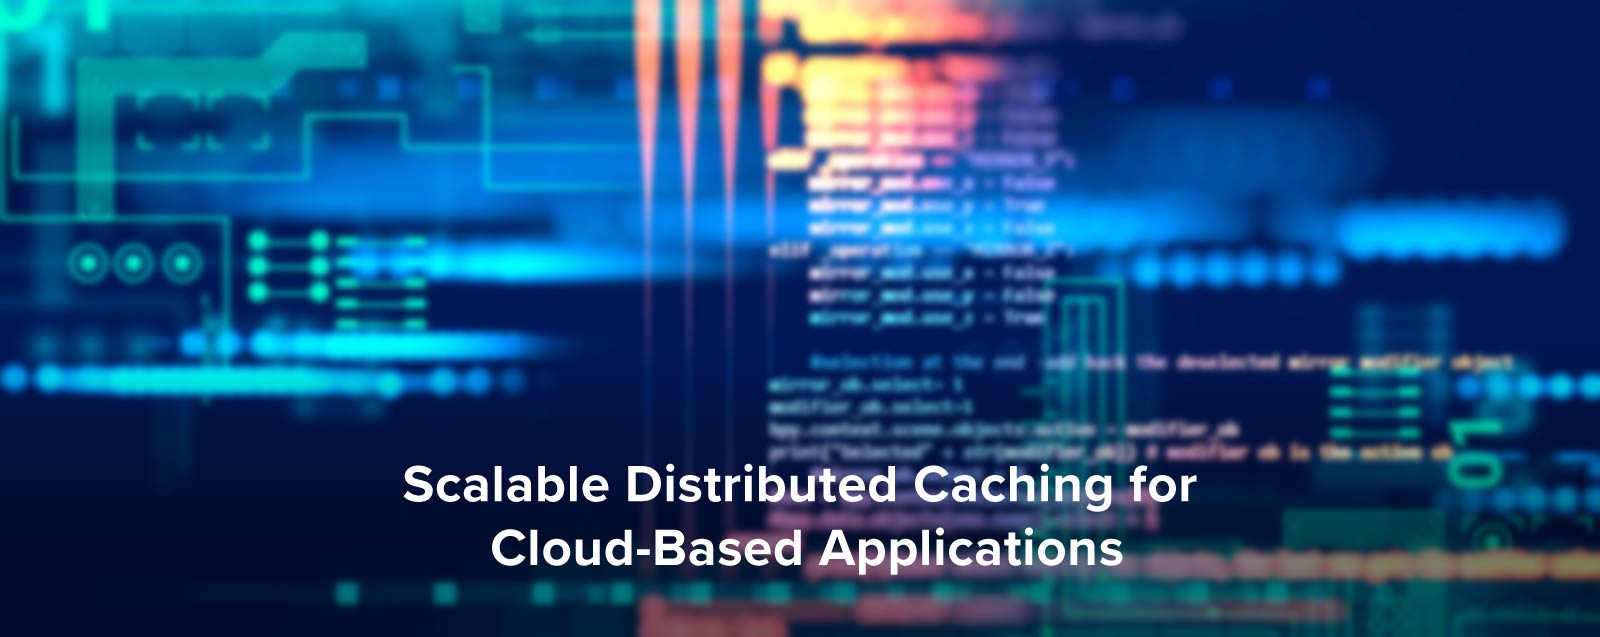 Scalable Distributed Caching for Cloud-Based Applications